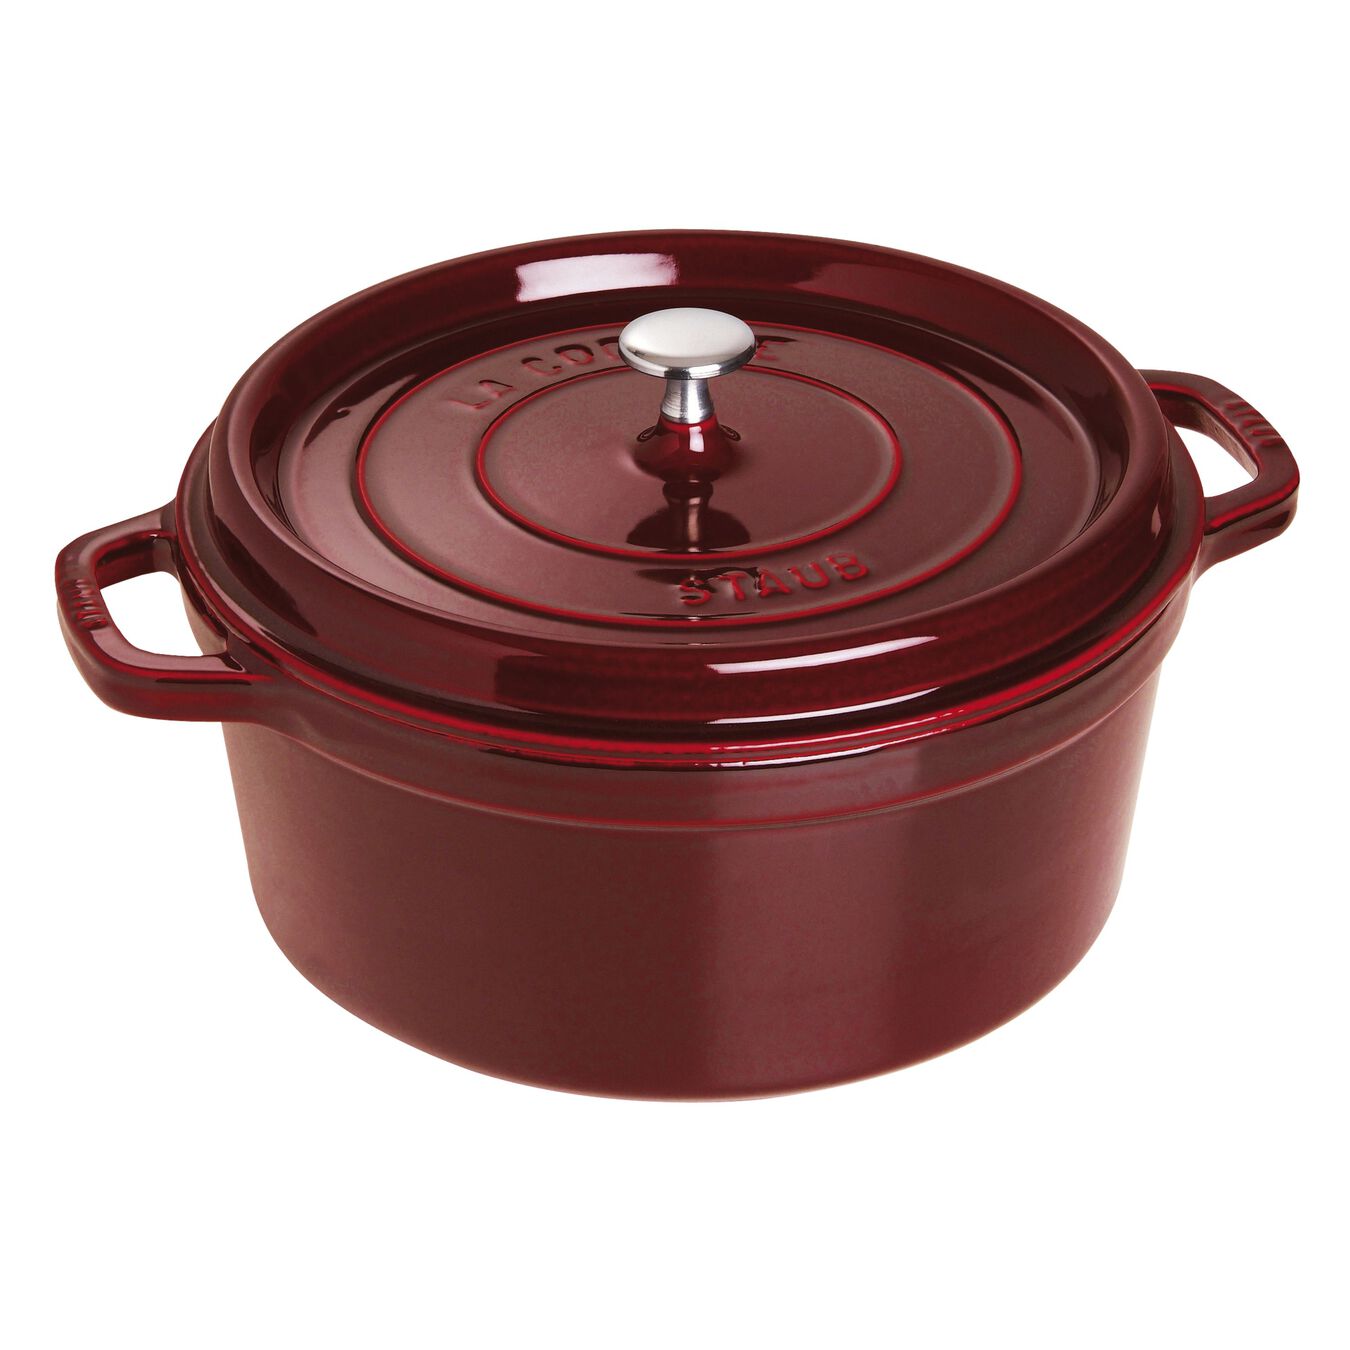 6.75 l cast iron round Cocotte, grenadine-red,,large 1